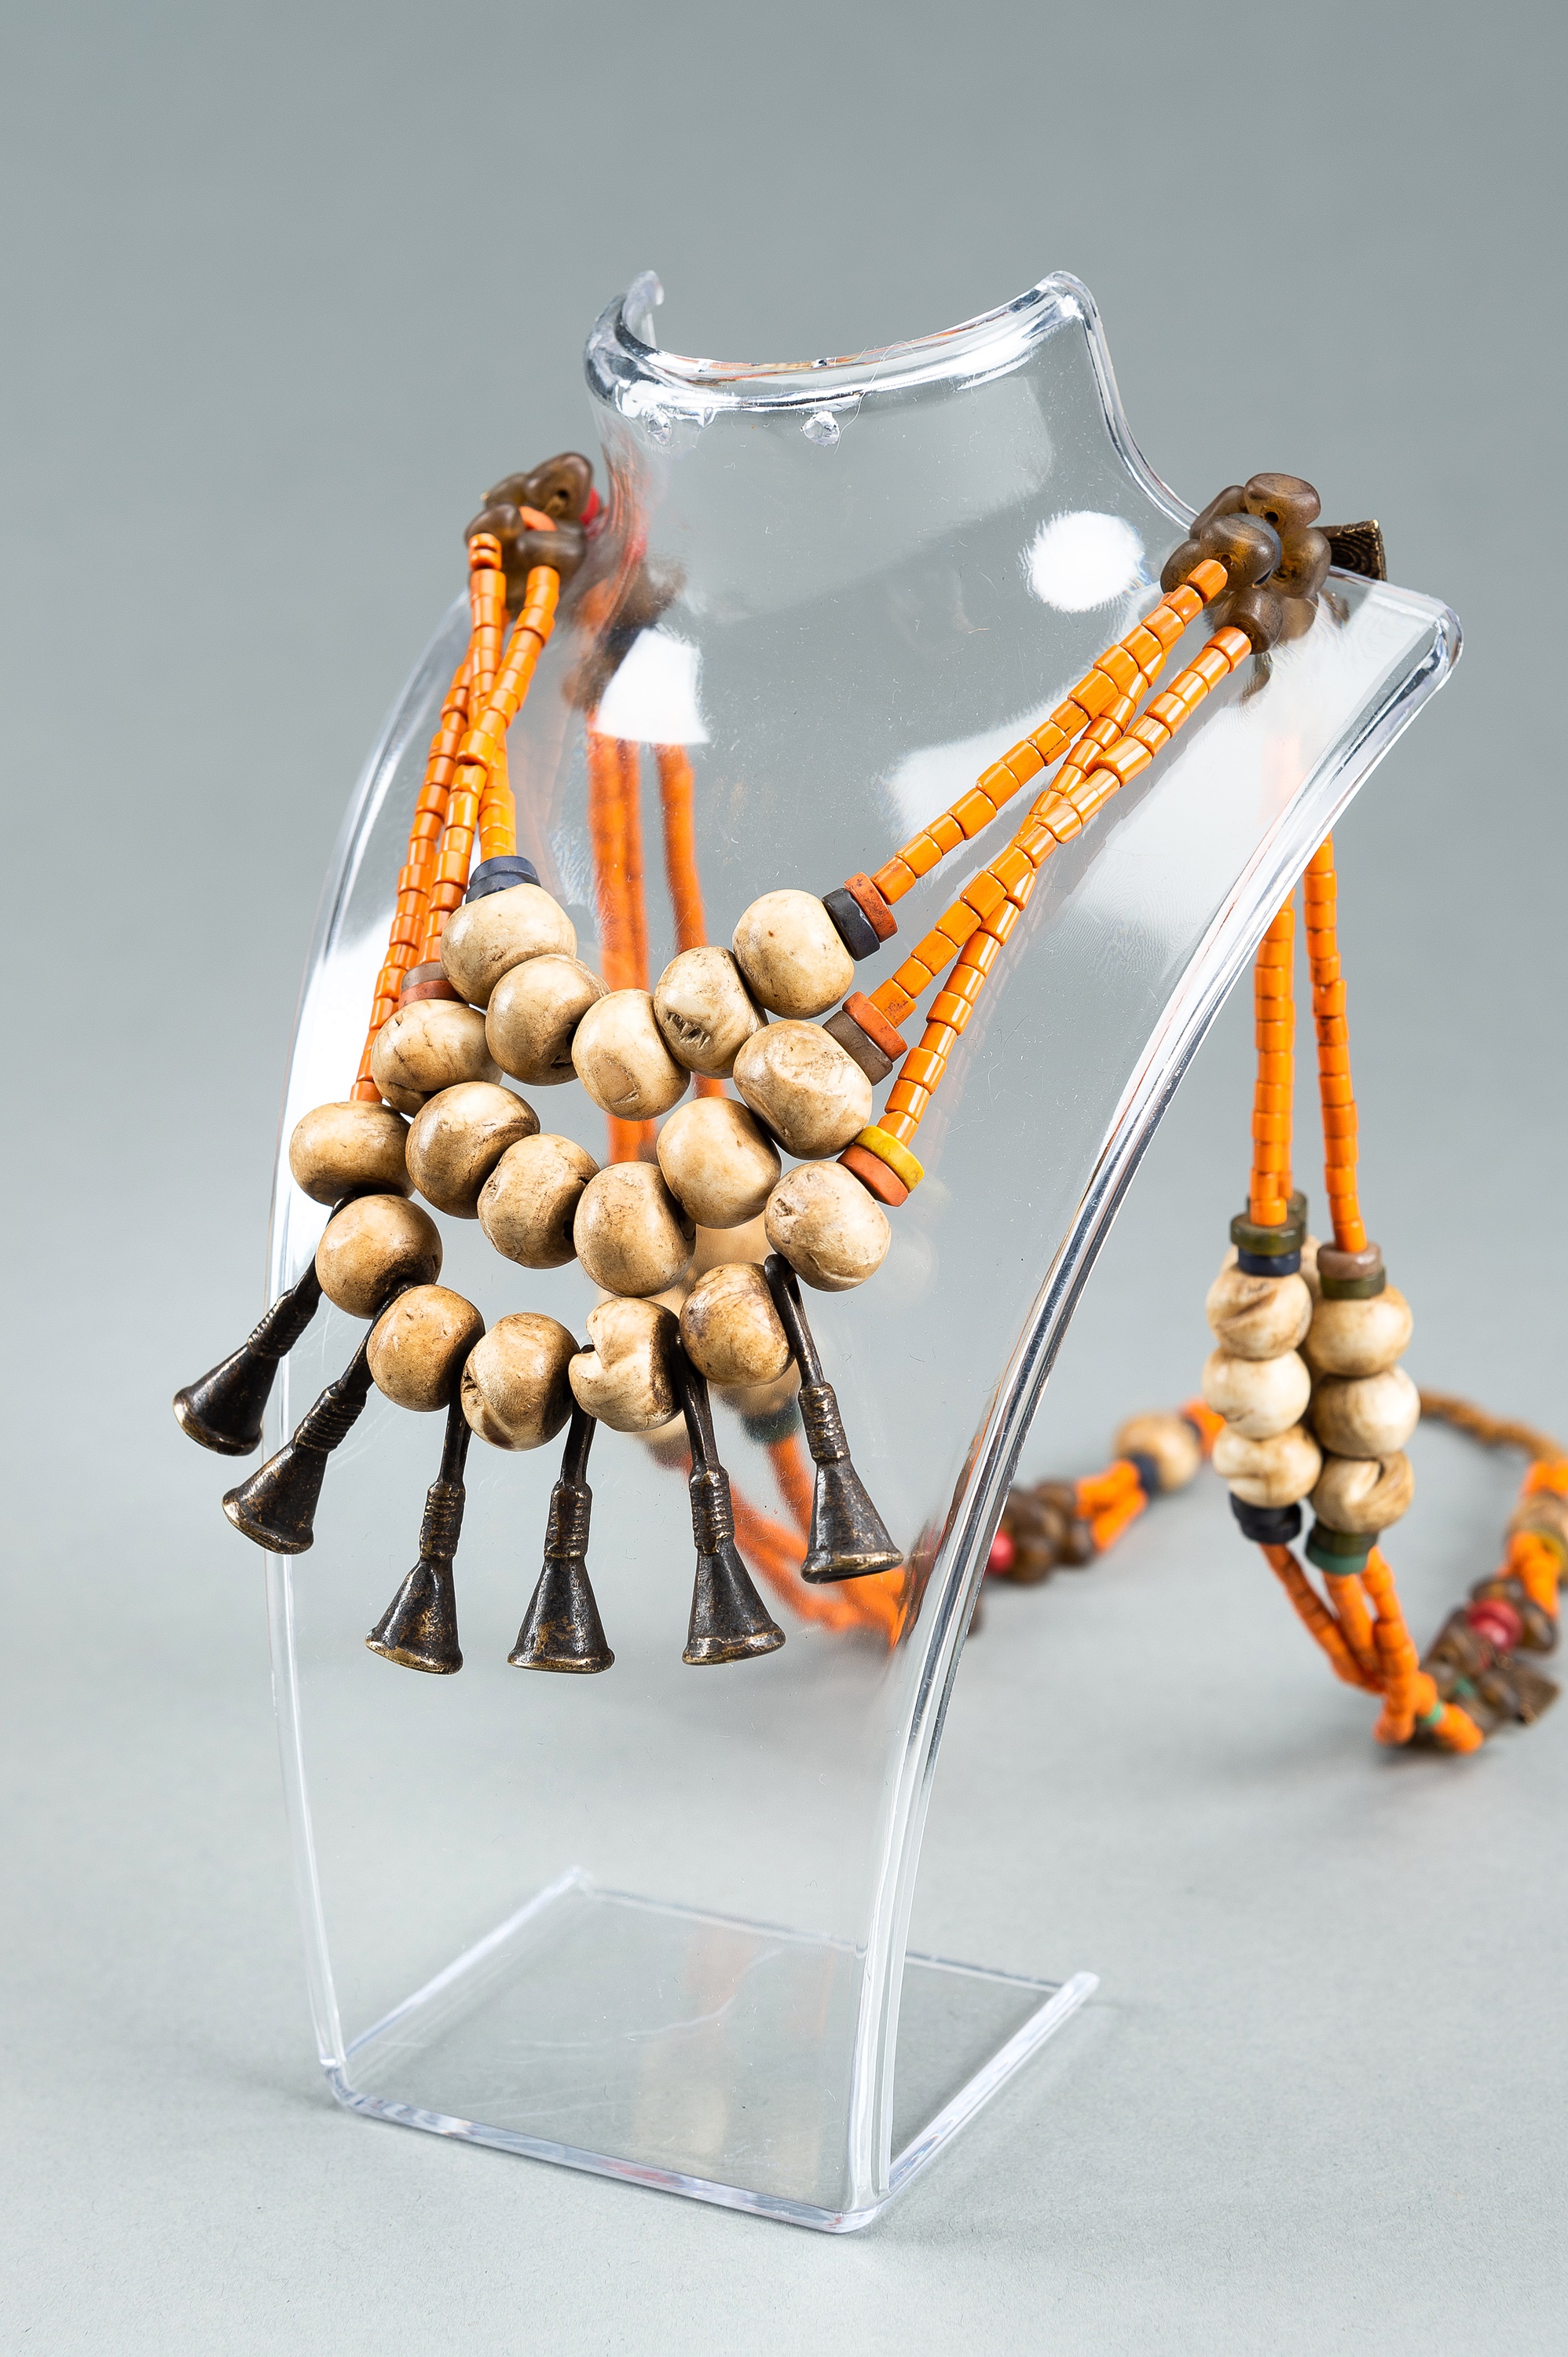 A NAGALAND MULTI-COLORED GLASS, BRASS AND SHELL NECKLACE, c. 1900s - Image 10 of 10